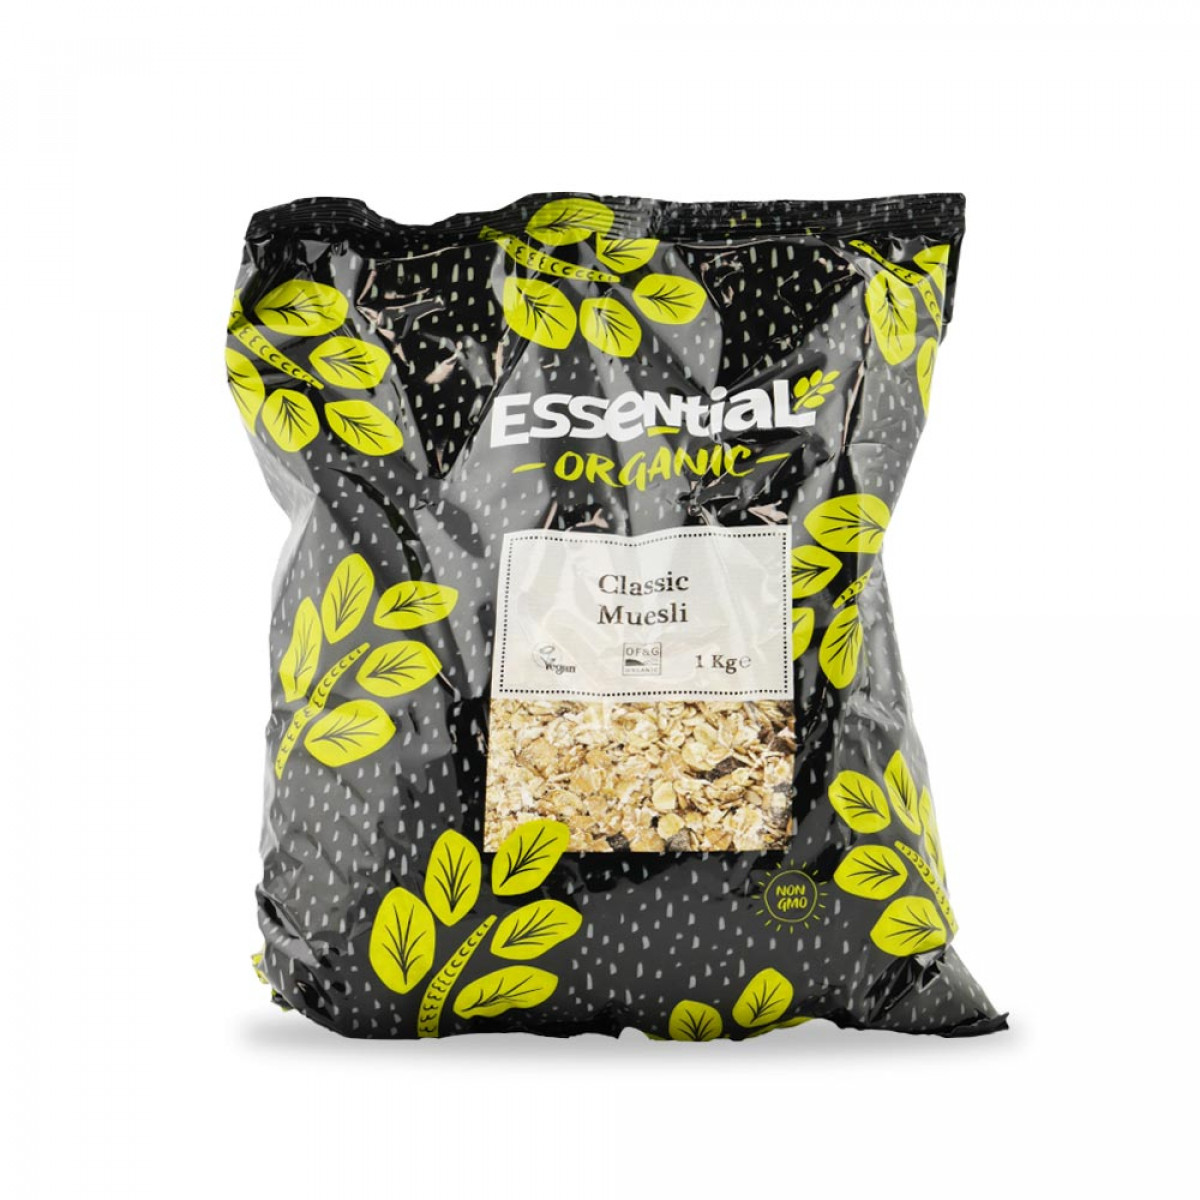 Product picture for Muesli Classic